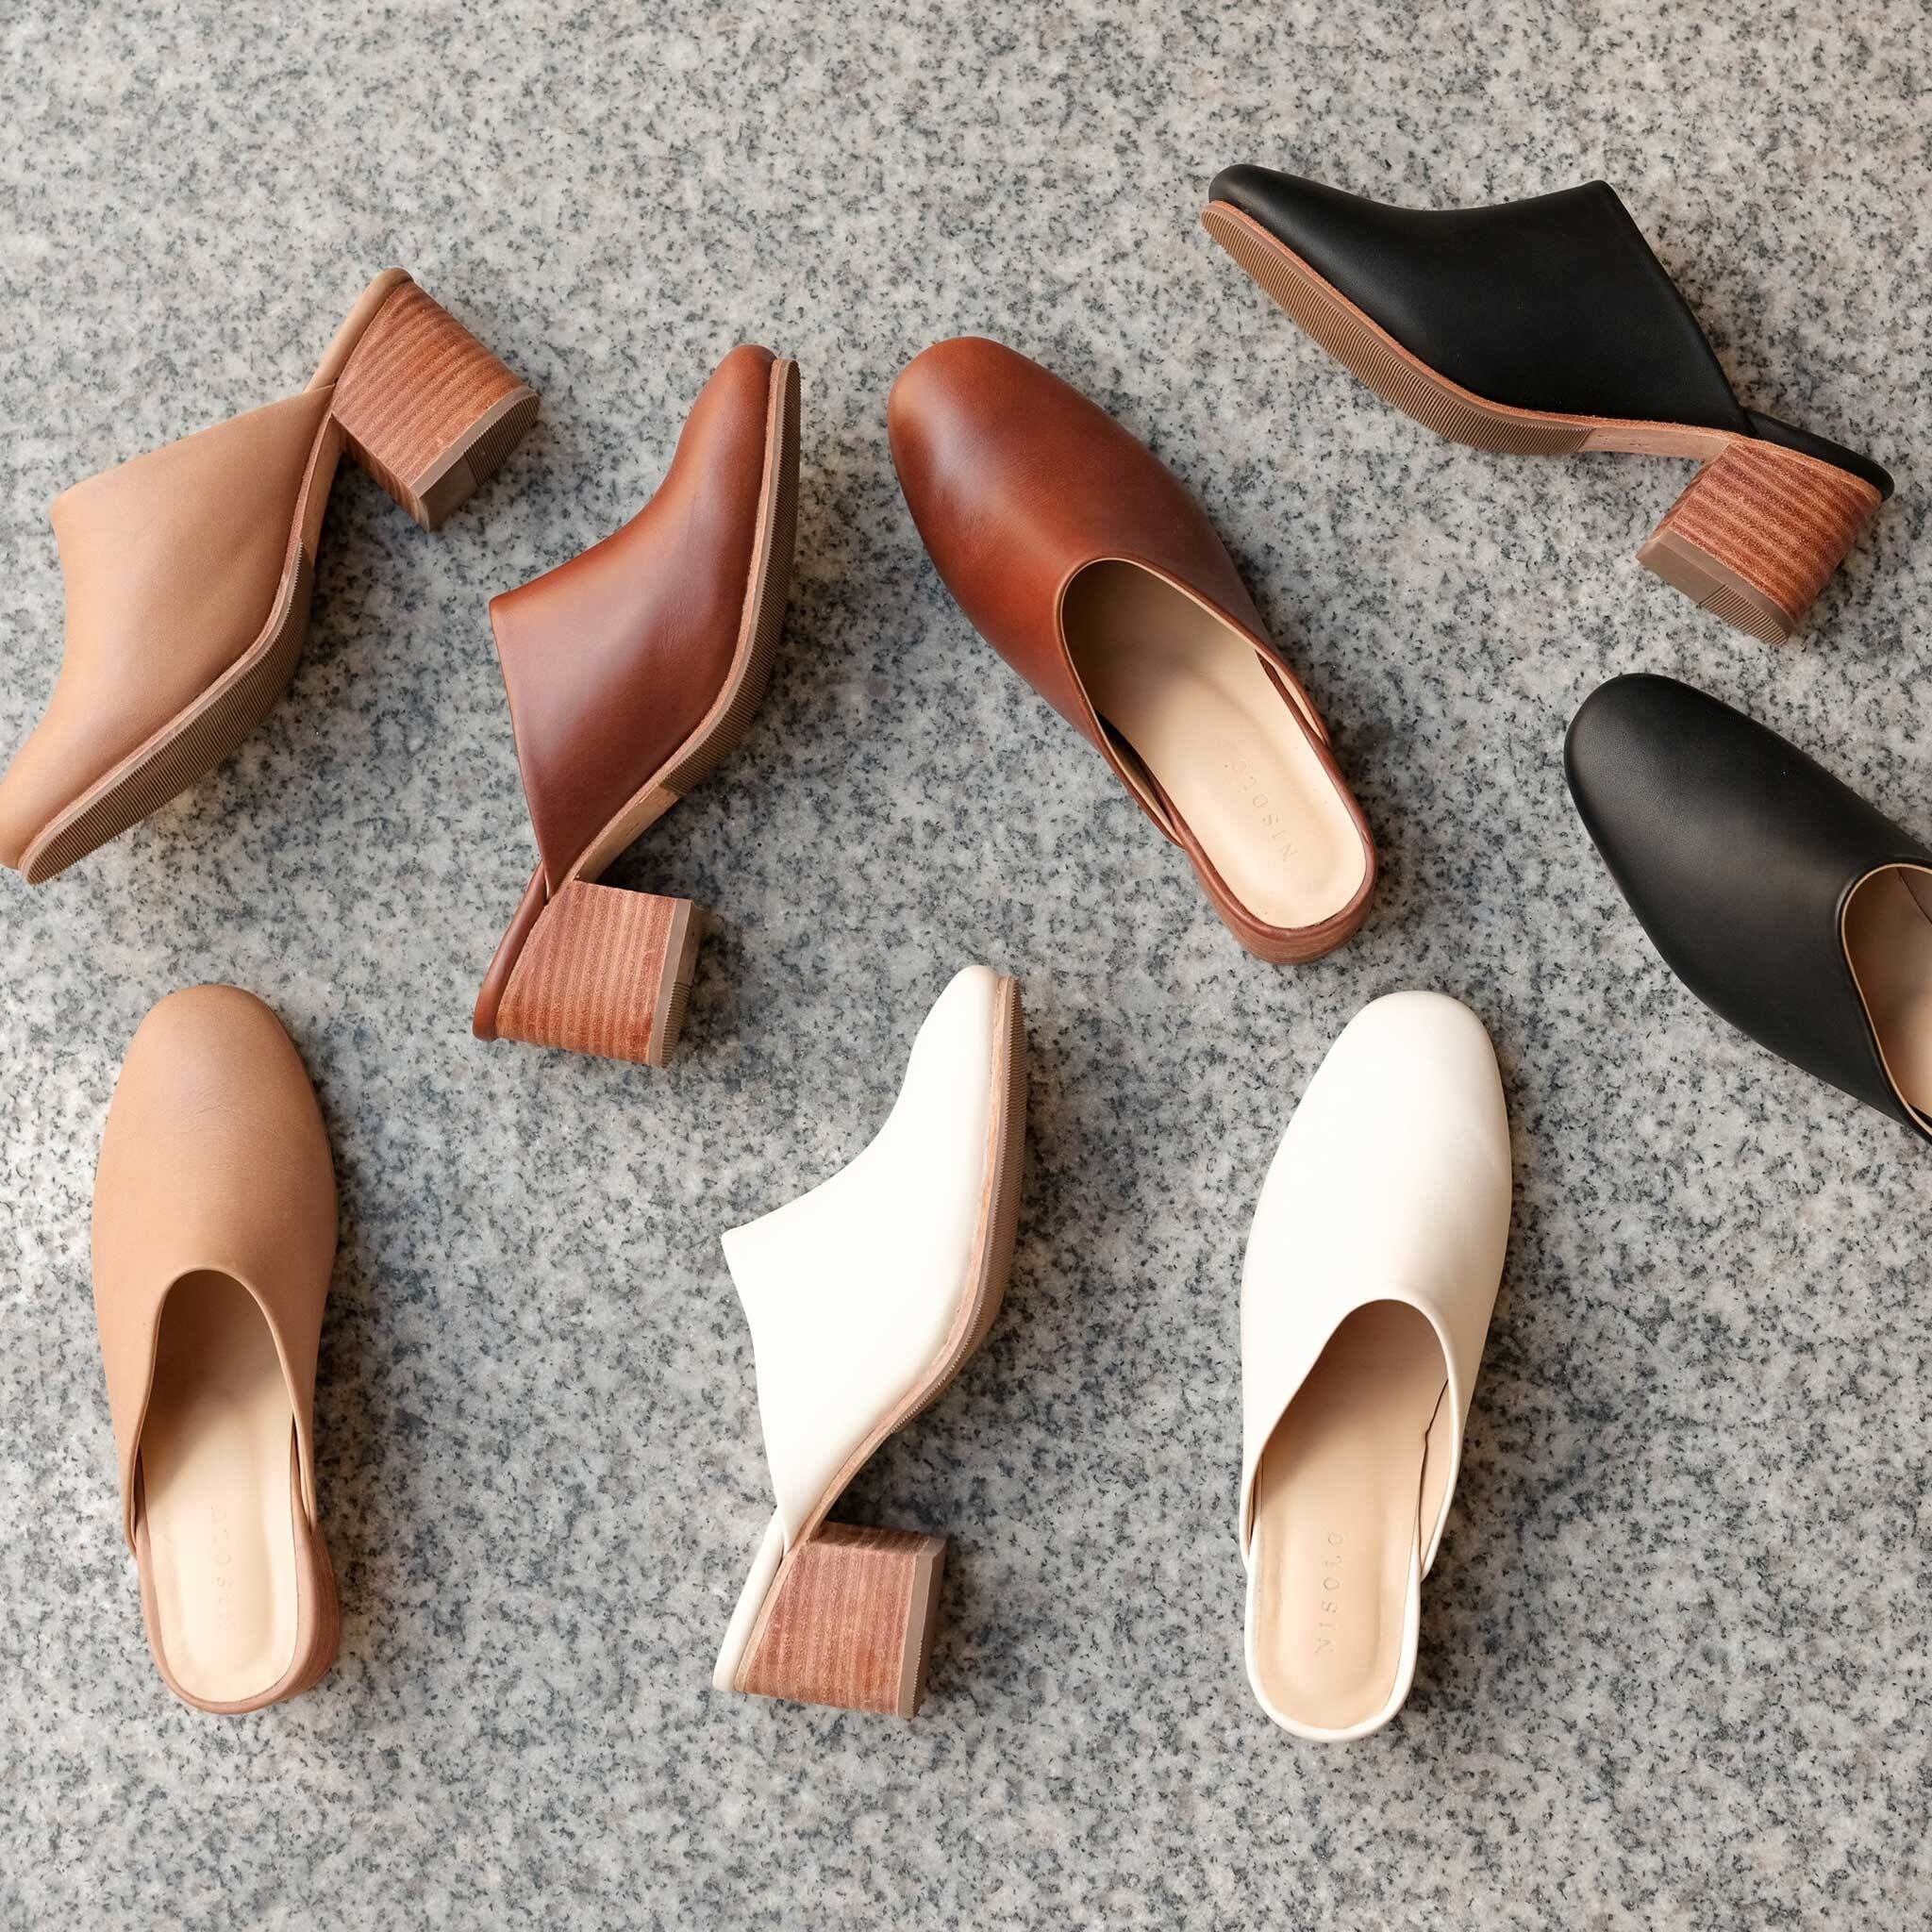 several pairs of the same mule in different colors on the floor